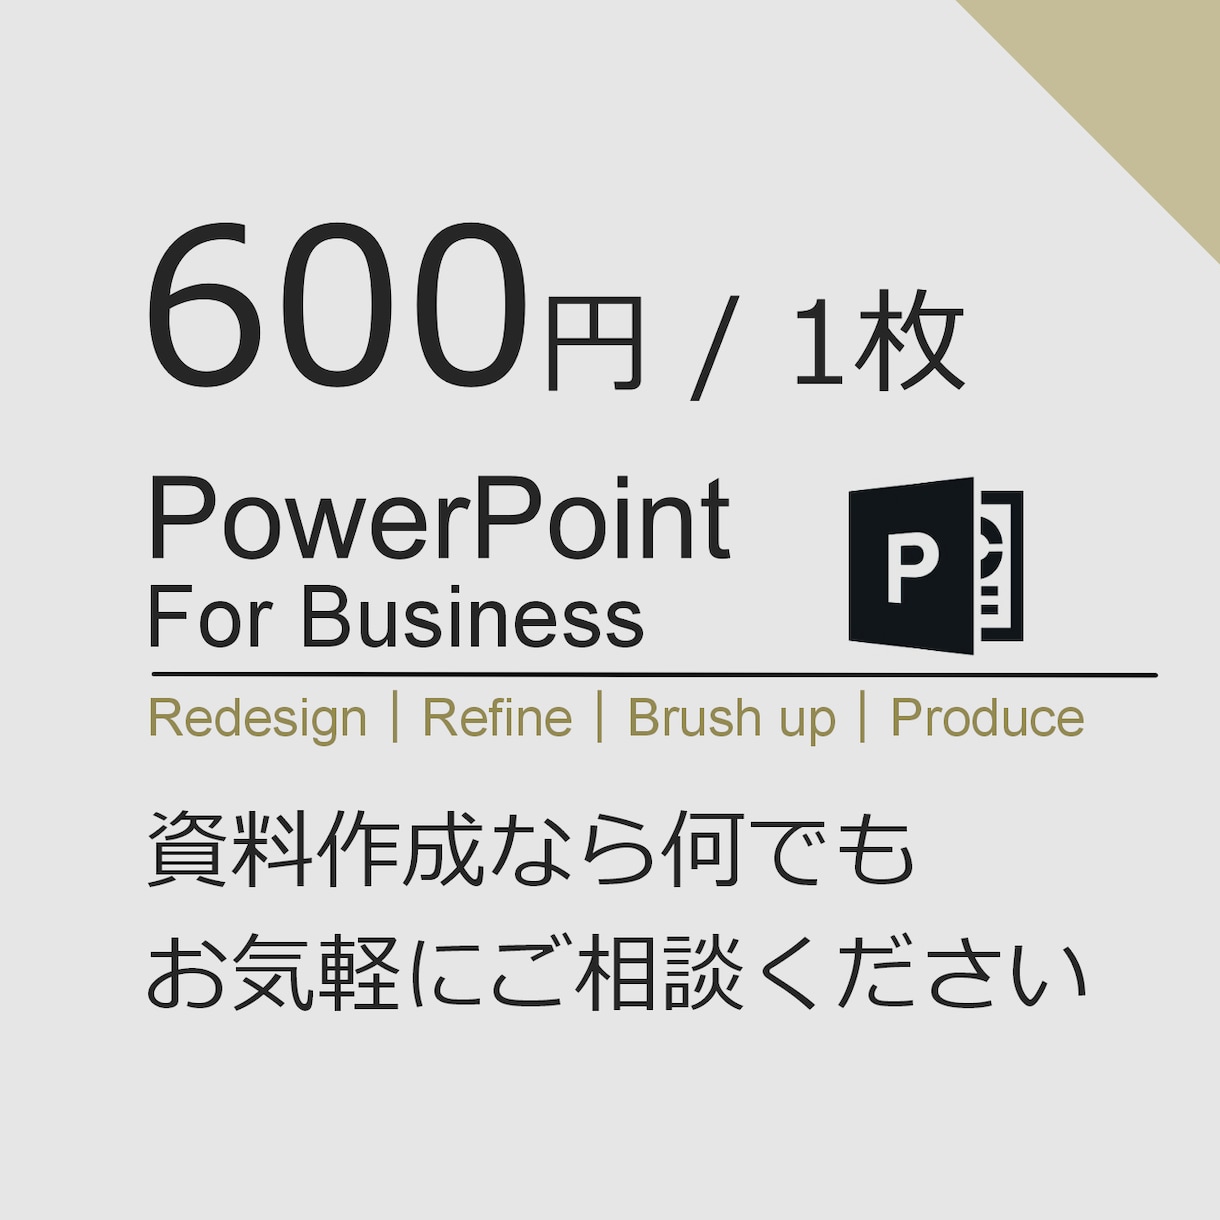 💬Coconala｜600 yen/sheet We will create PowerPoint materials and graphs!Please feel free to contact us first! | Creation and support of materials and proposals